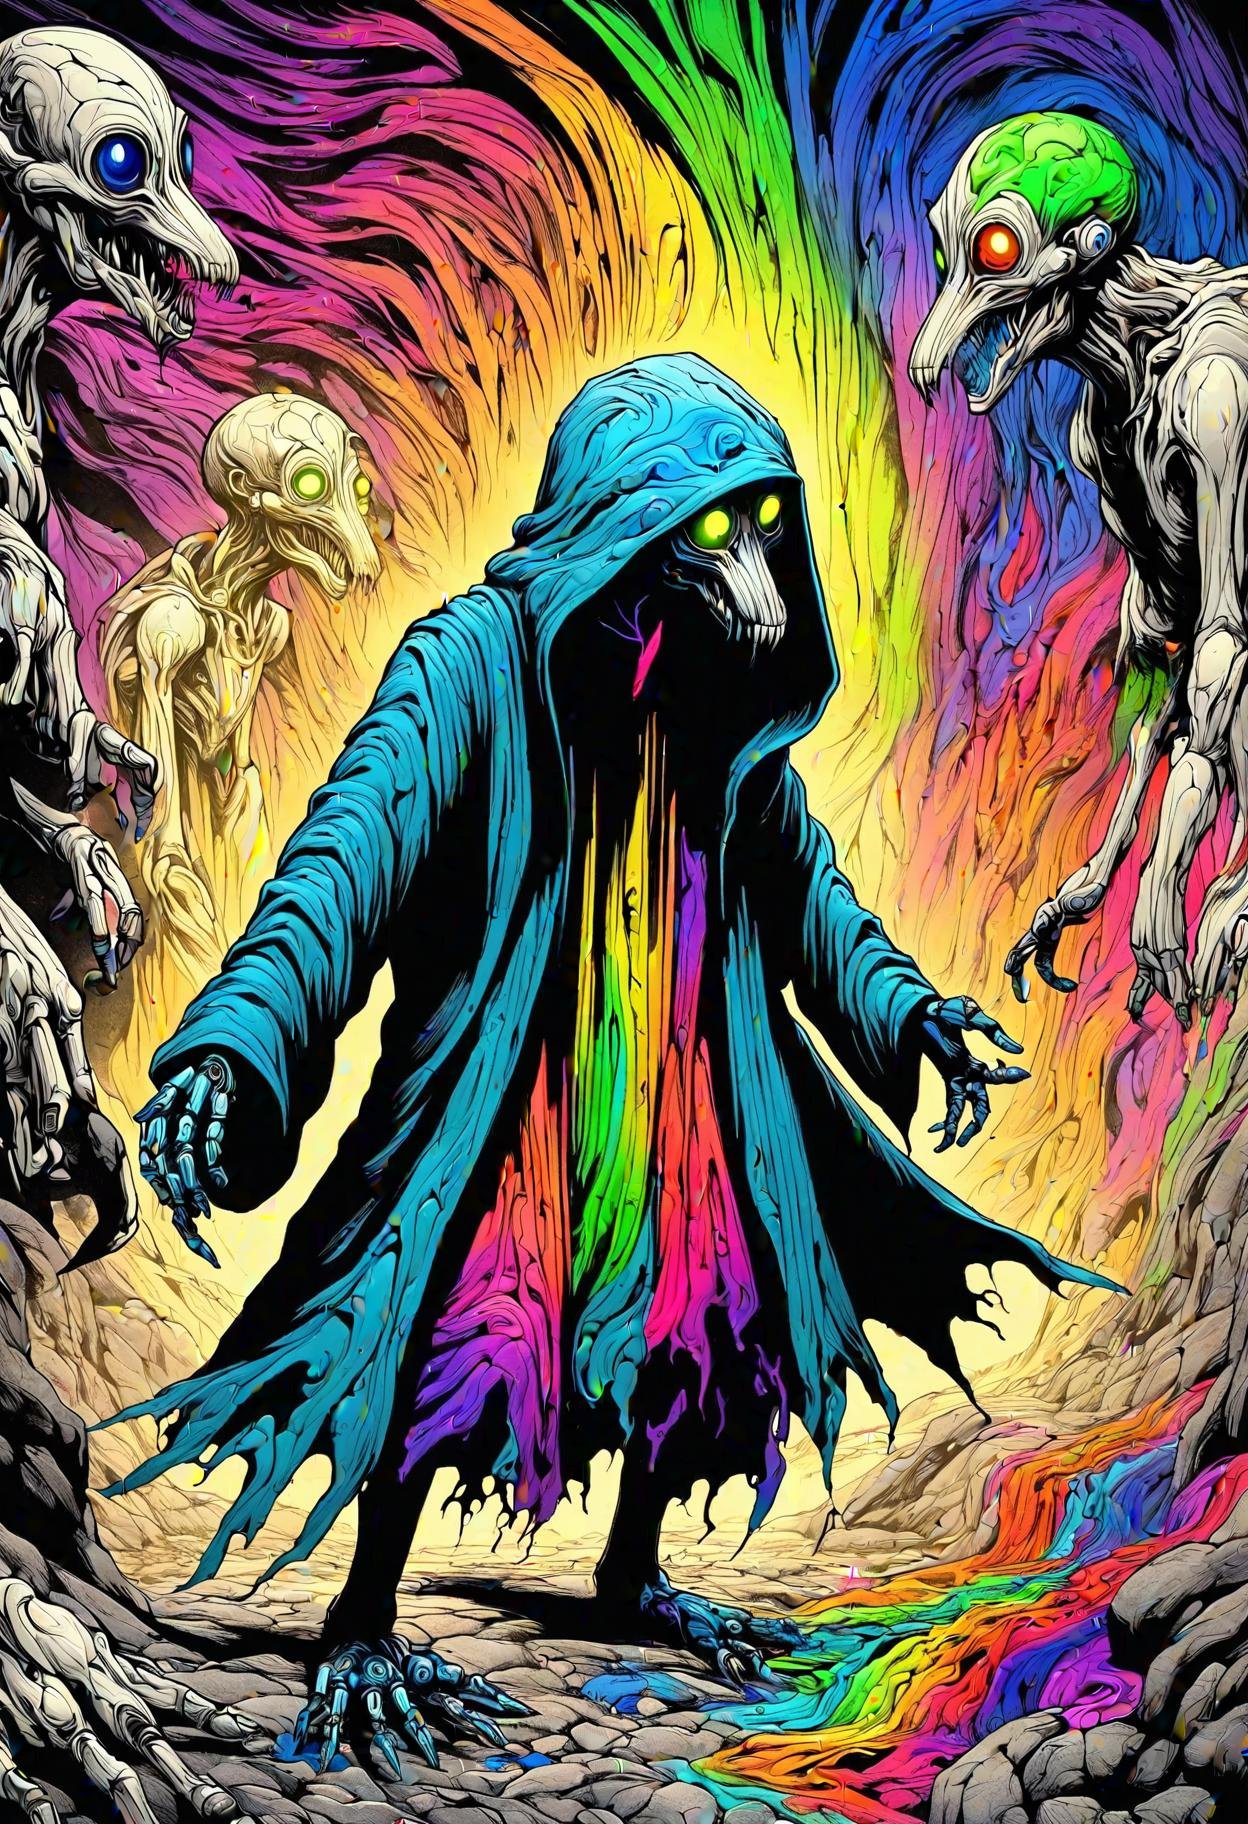 DonMM3l4nch0l1cP5ych0XL,vibrant, psychodelic, chupacabra, dark hooded floating humanoid entity, cloaked in tattered hooded robes, ghostly diffuse lower body, face hidden under hood, no distinct features, drains happiness and positive emotions, cold despair inducing aura, soul sucking kiss, fear, despair, darkest aspects of magic, robotic,research-oriented,carcinogenic,rocky terrain,vibrant energy,future-proof,unearthly ,  <lora:DonMM3l4nch0l1cP5ych0XL-000004:0.8>